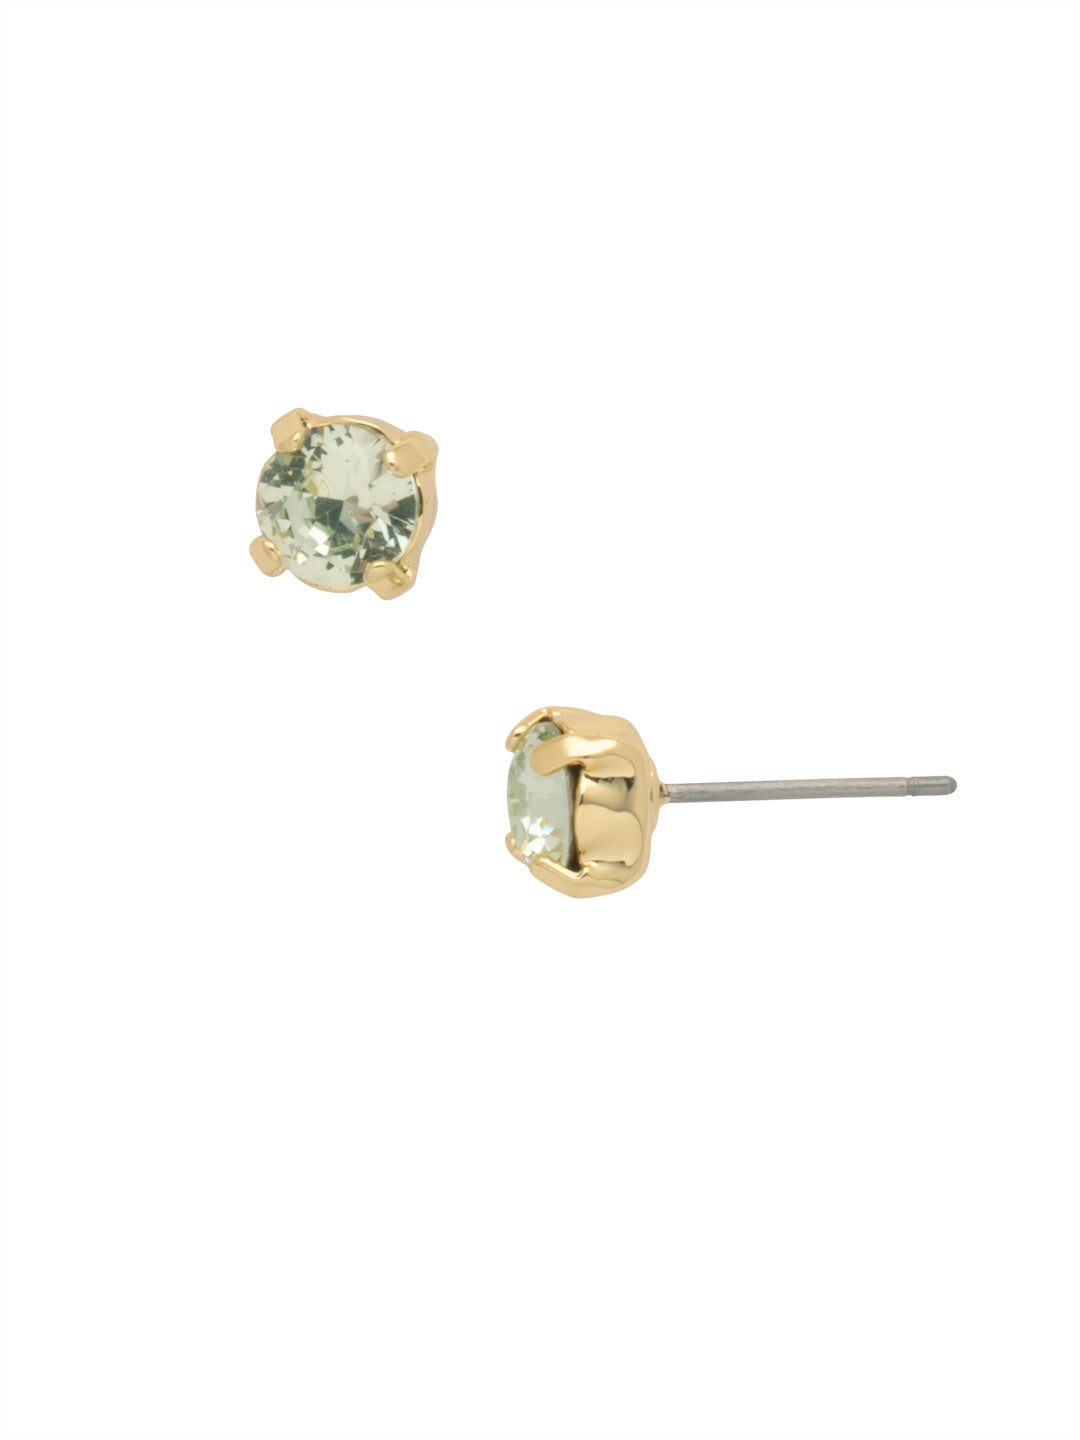 Jayda Stud Earrings - EDN32BGMIN - <p>The Jayda Stud Earrings are the perfect every day wardrobe staple. A round crystal nestles perfectly in a metal plated post with four prongs. </p><p>Need help picking a stud? <a href="https://www.sorrelli.com/blogs/sisterhood/round-stud-earrings-101-a-rundown-of-sizes-styles-and-sparkle">Check out our size guide!</a> From Sorrelli's Mint collection in our Bright Gold-tone finish.</p>